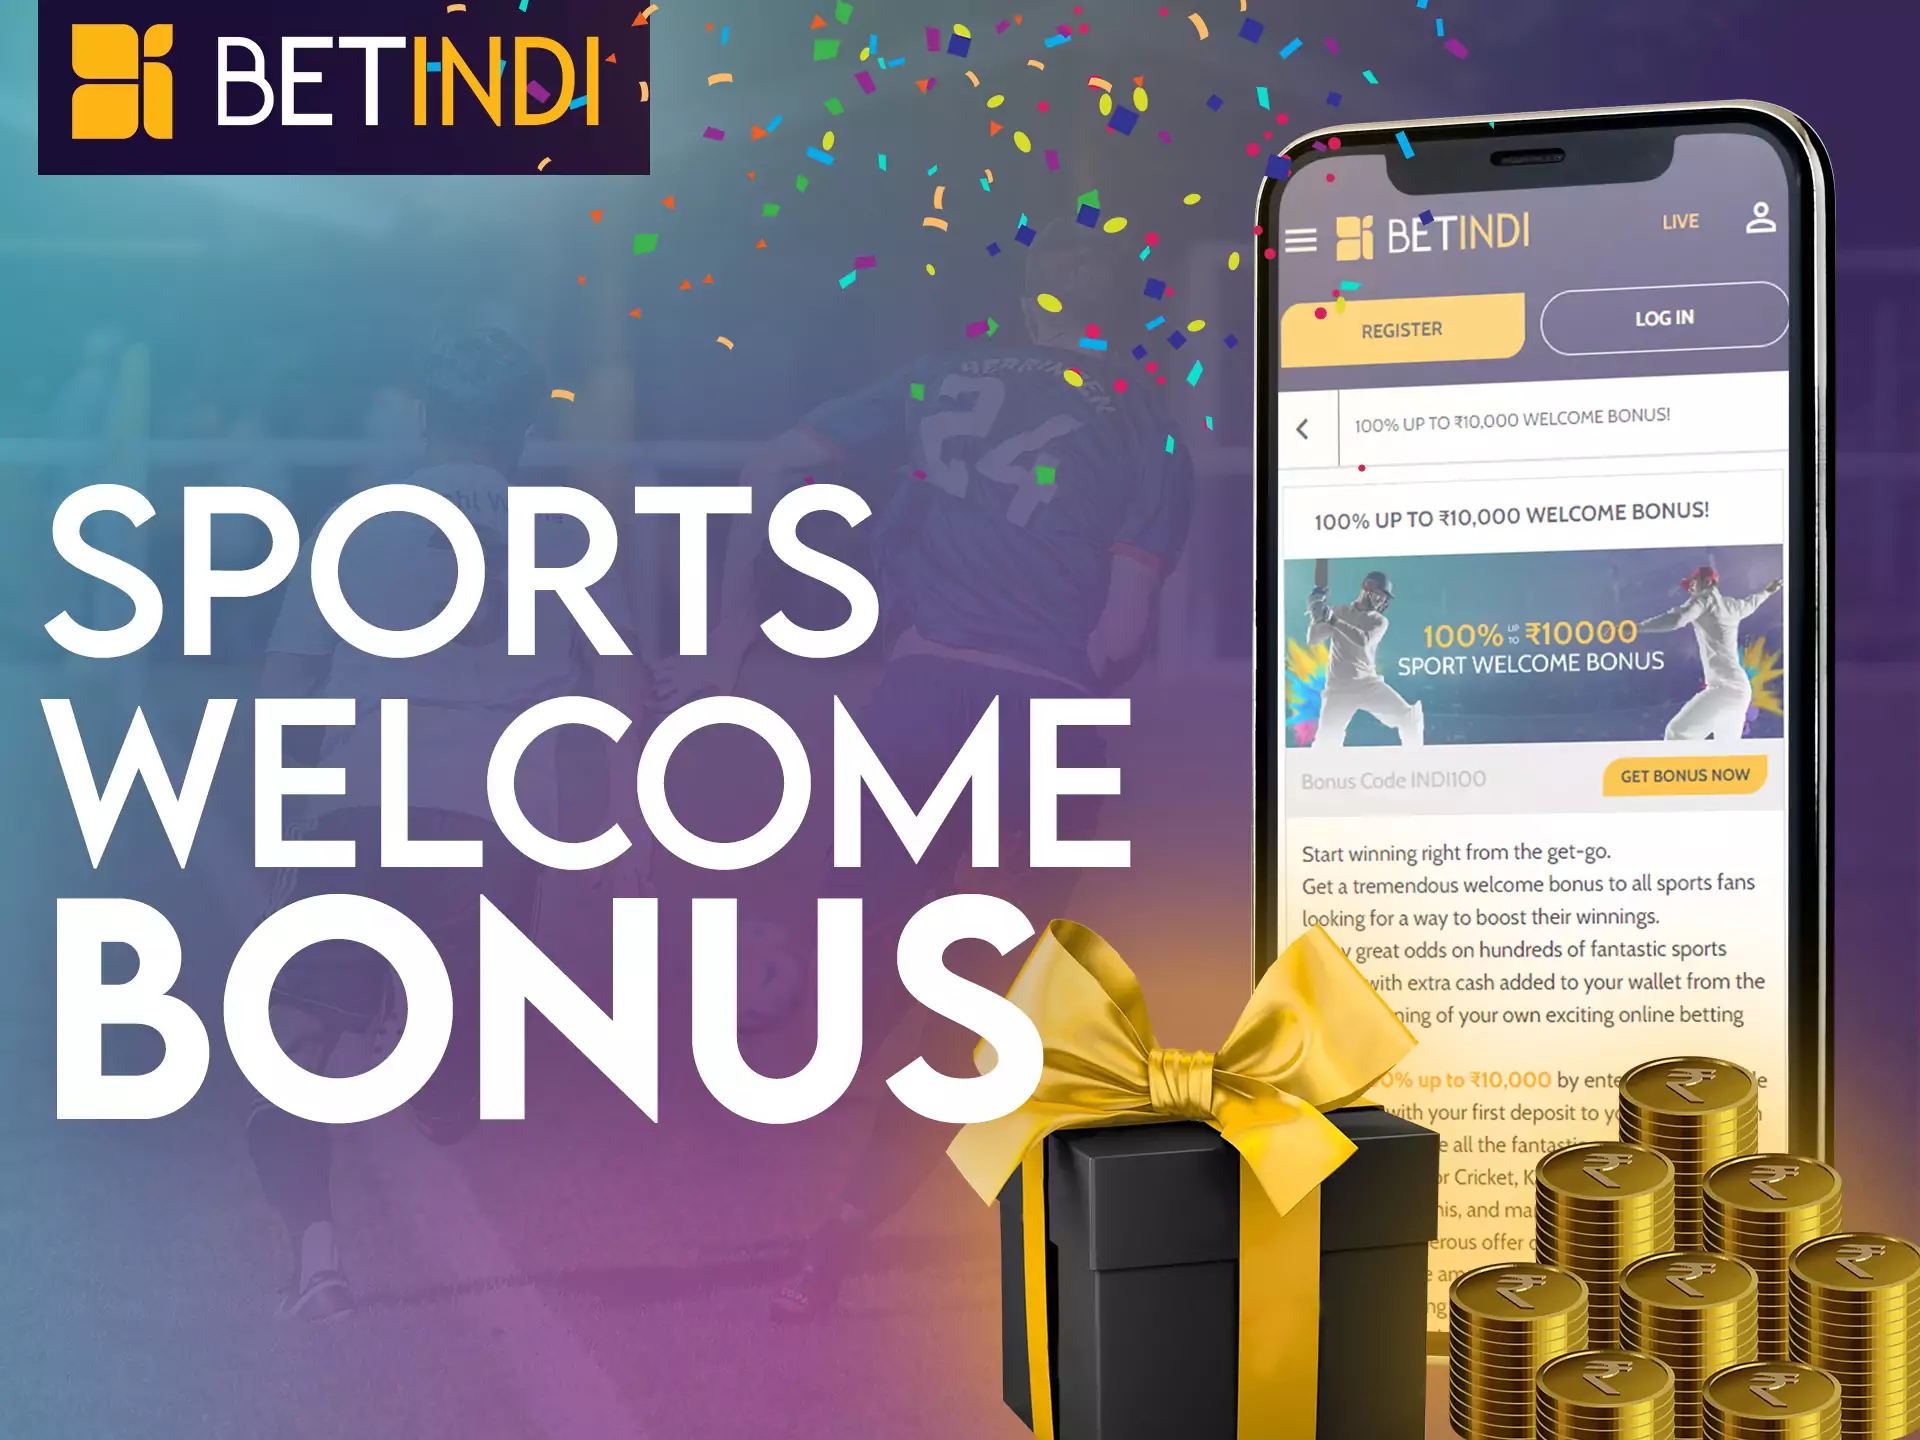 Betindi offers a welcome bonus for sports betting after registration.